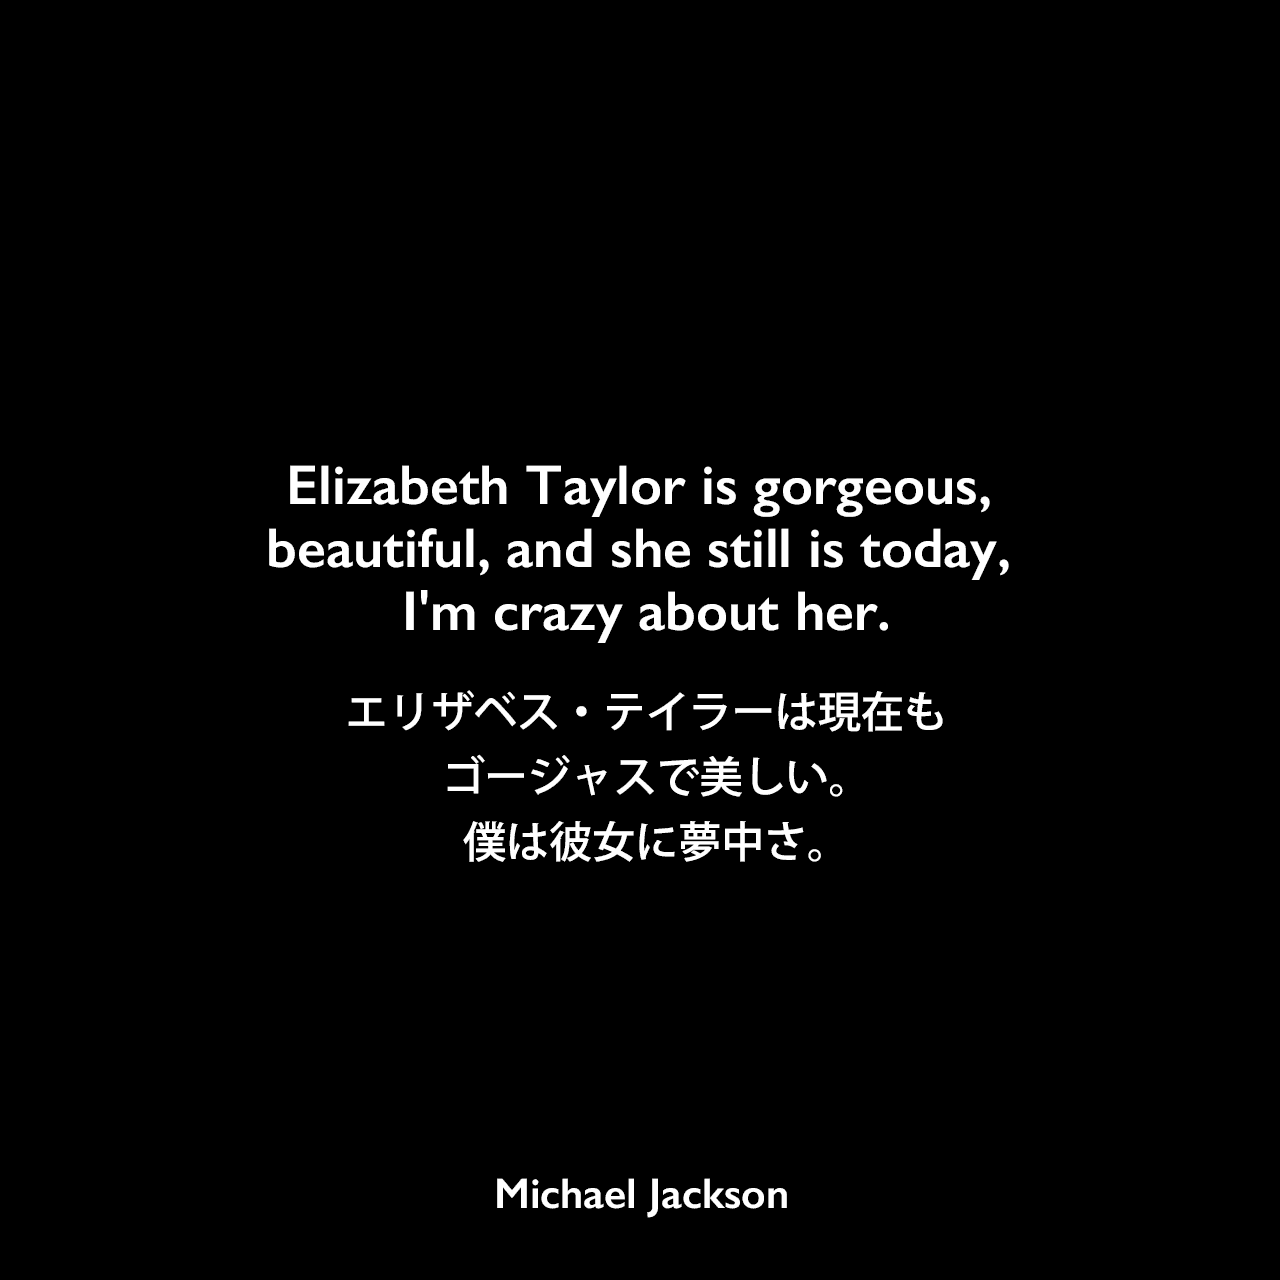 Elizabeth Taylor is gorgeous, beautiful, and she still is today, I'm crazy about her.エリザベス・テイラーは現在もゴージャスで、美しい。僕は彼女に夢中さ。Michael Jackson